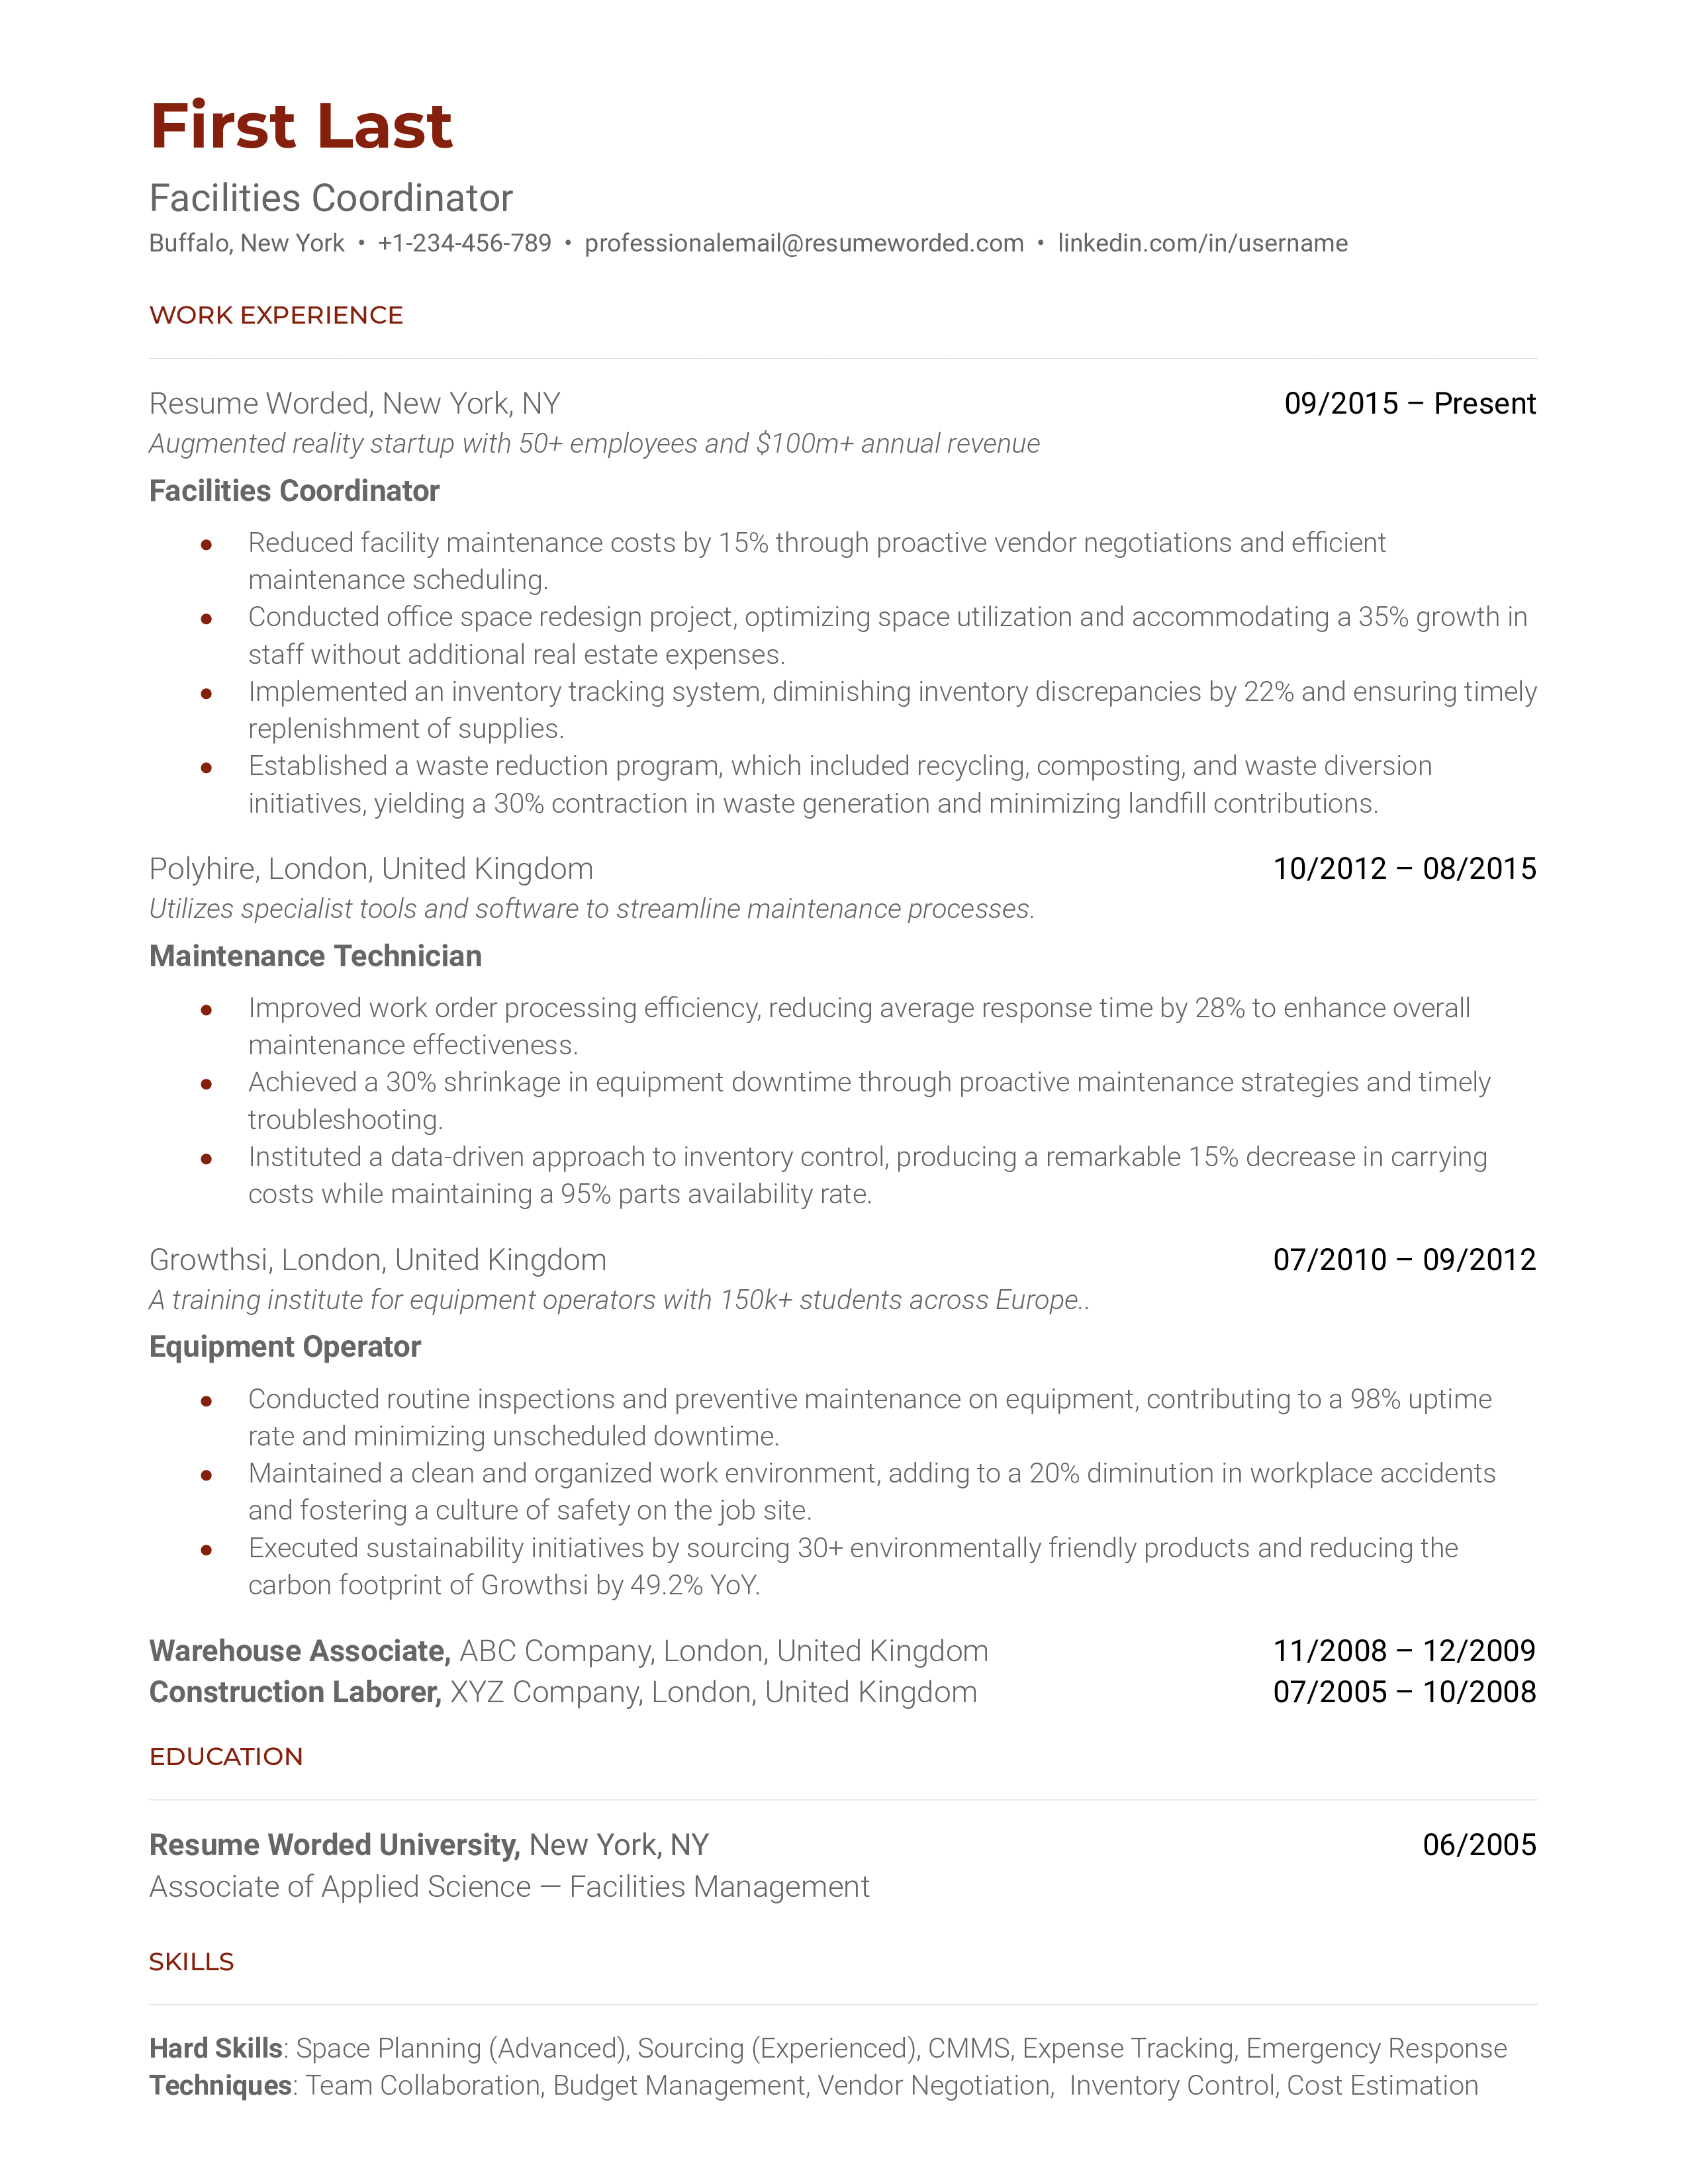 Professional, well-organized resume for a Facilities Coordinator position.